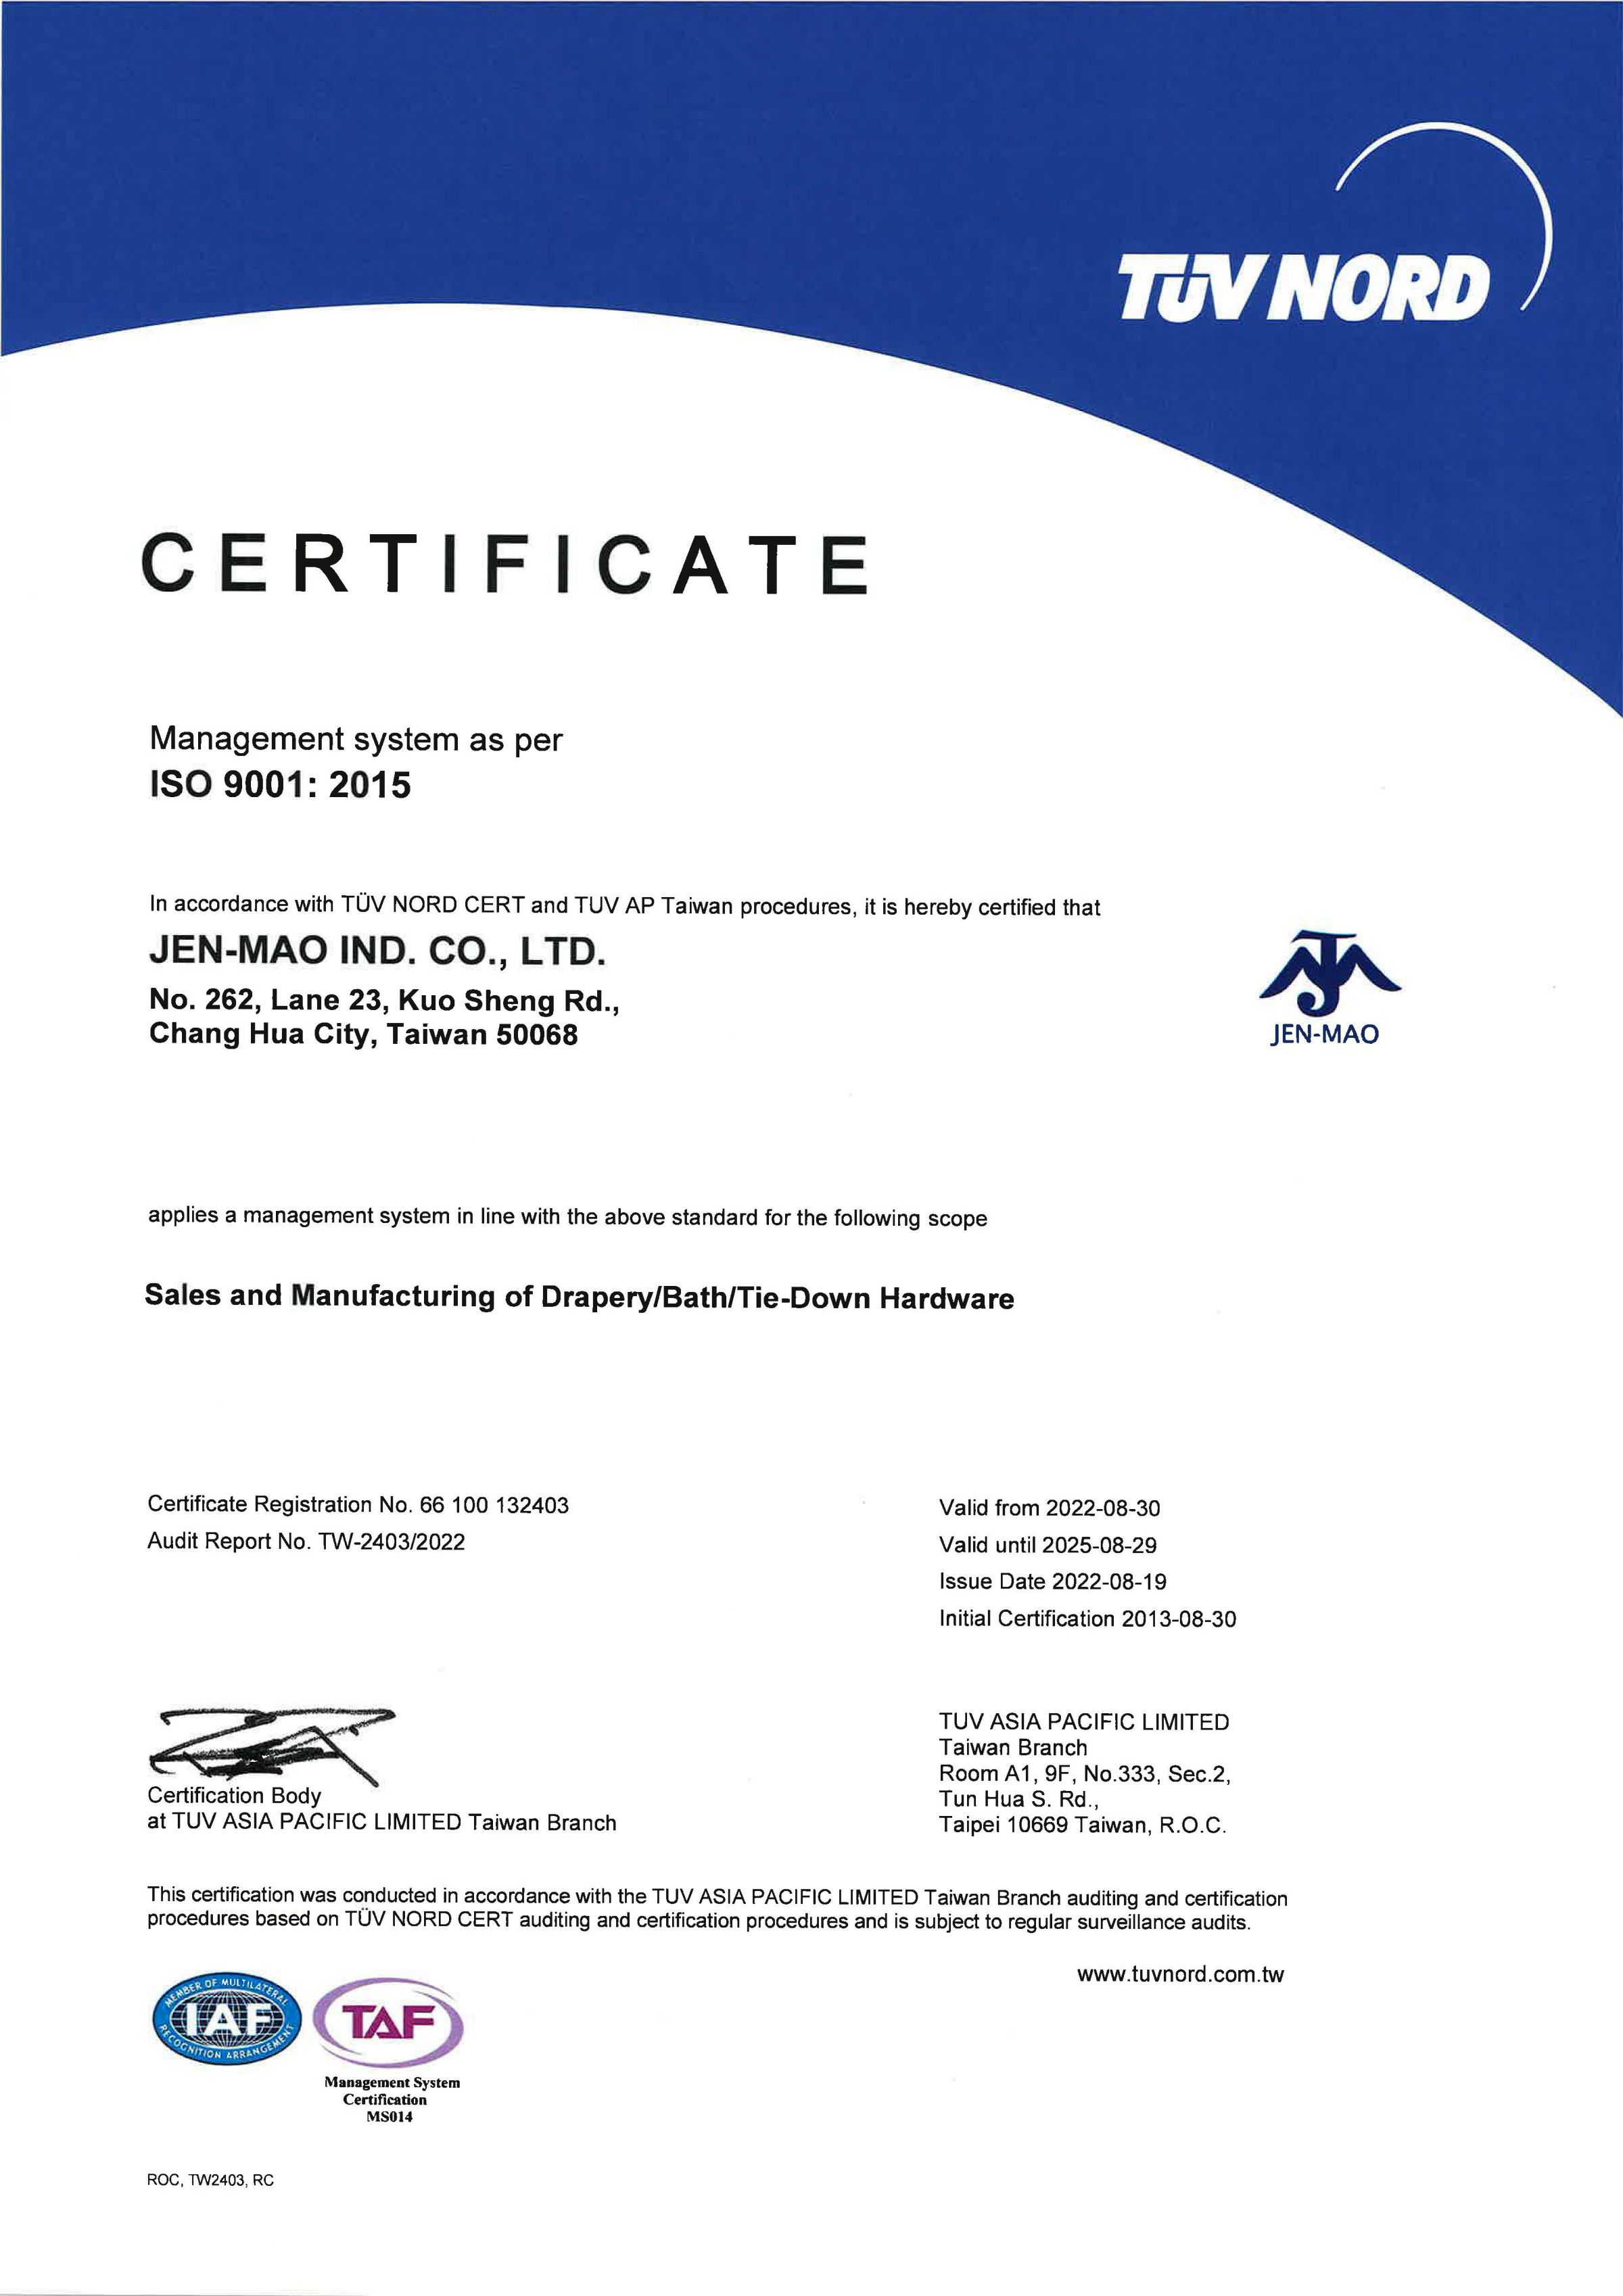 Quality Policy - ISO 9001:2015 Certificate